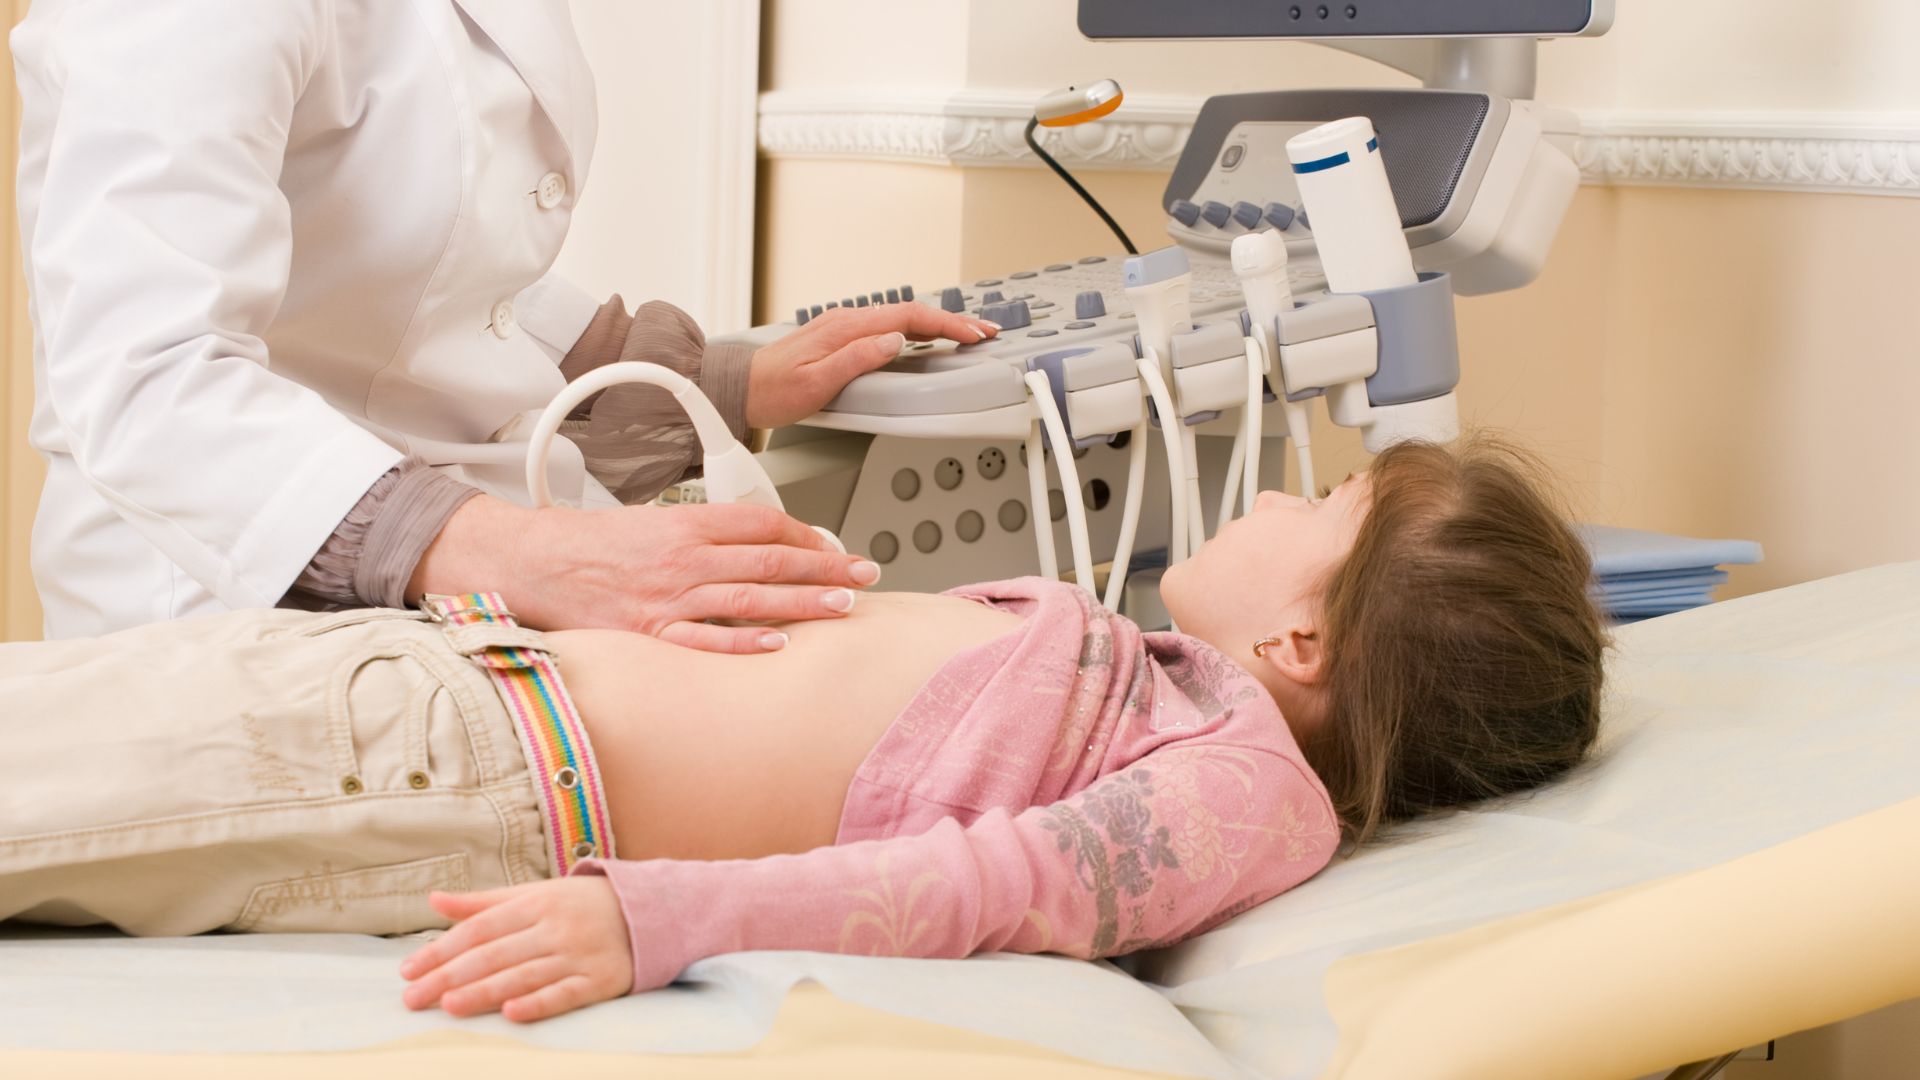 The doctor is performing an ultrasound (ECHO) of the child's heart at PULSE Cardiology Center.